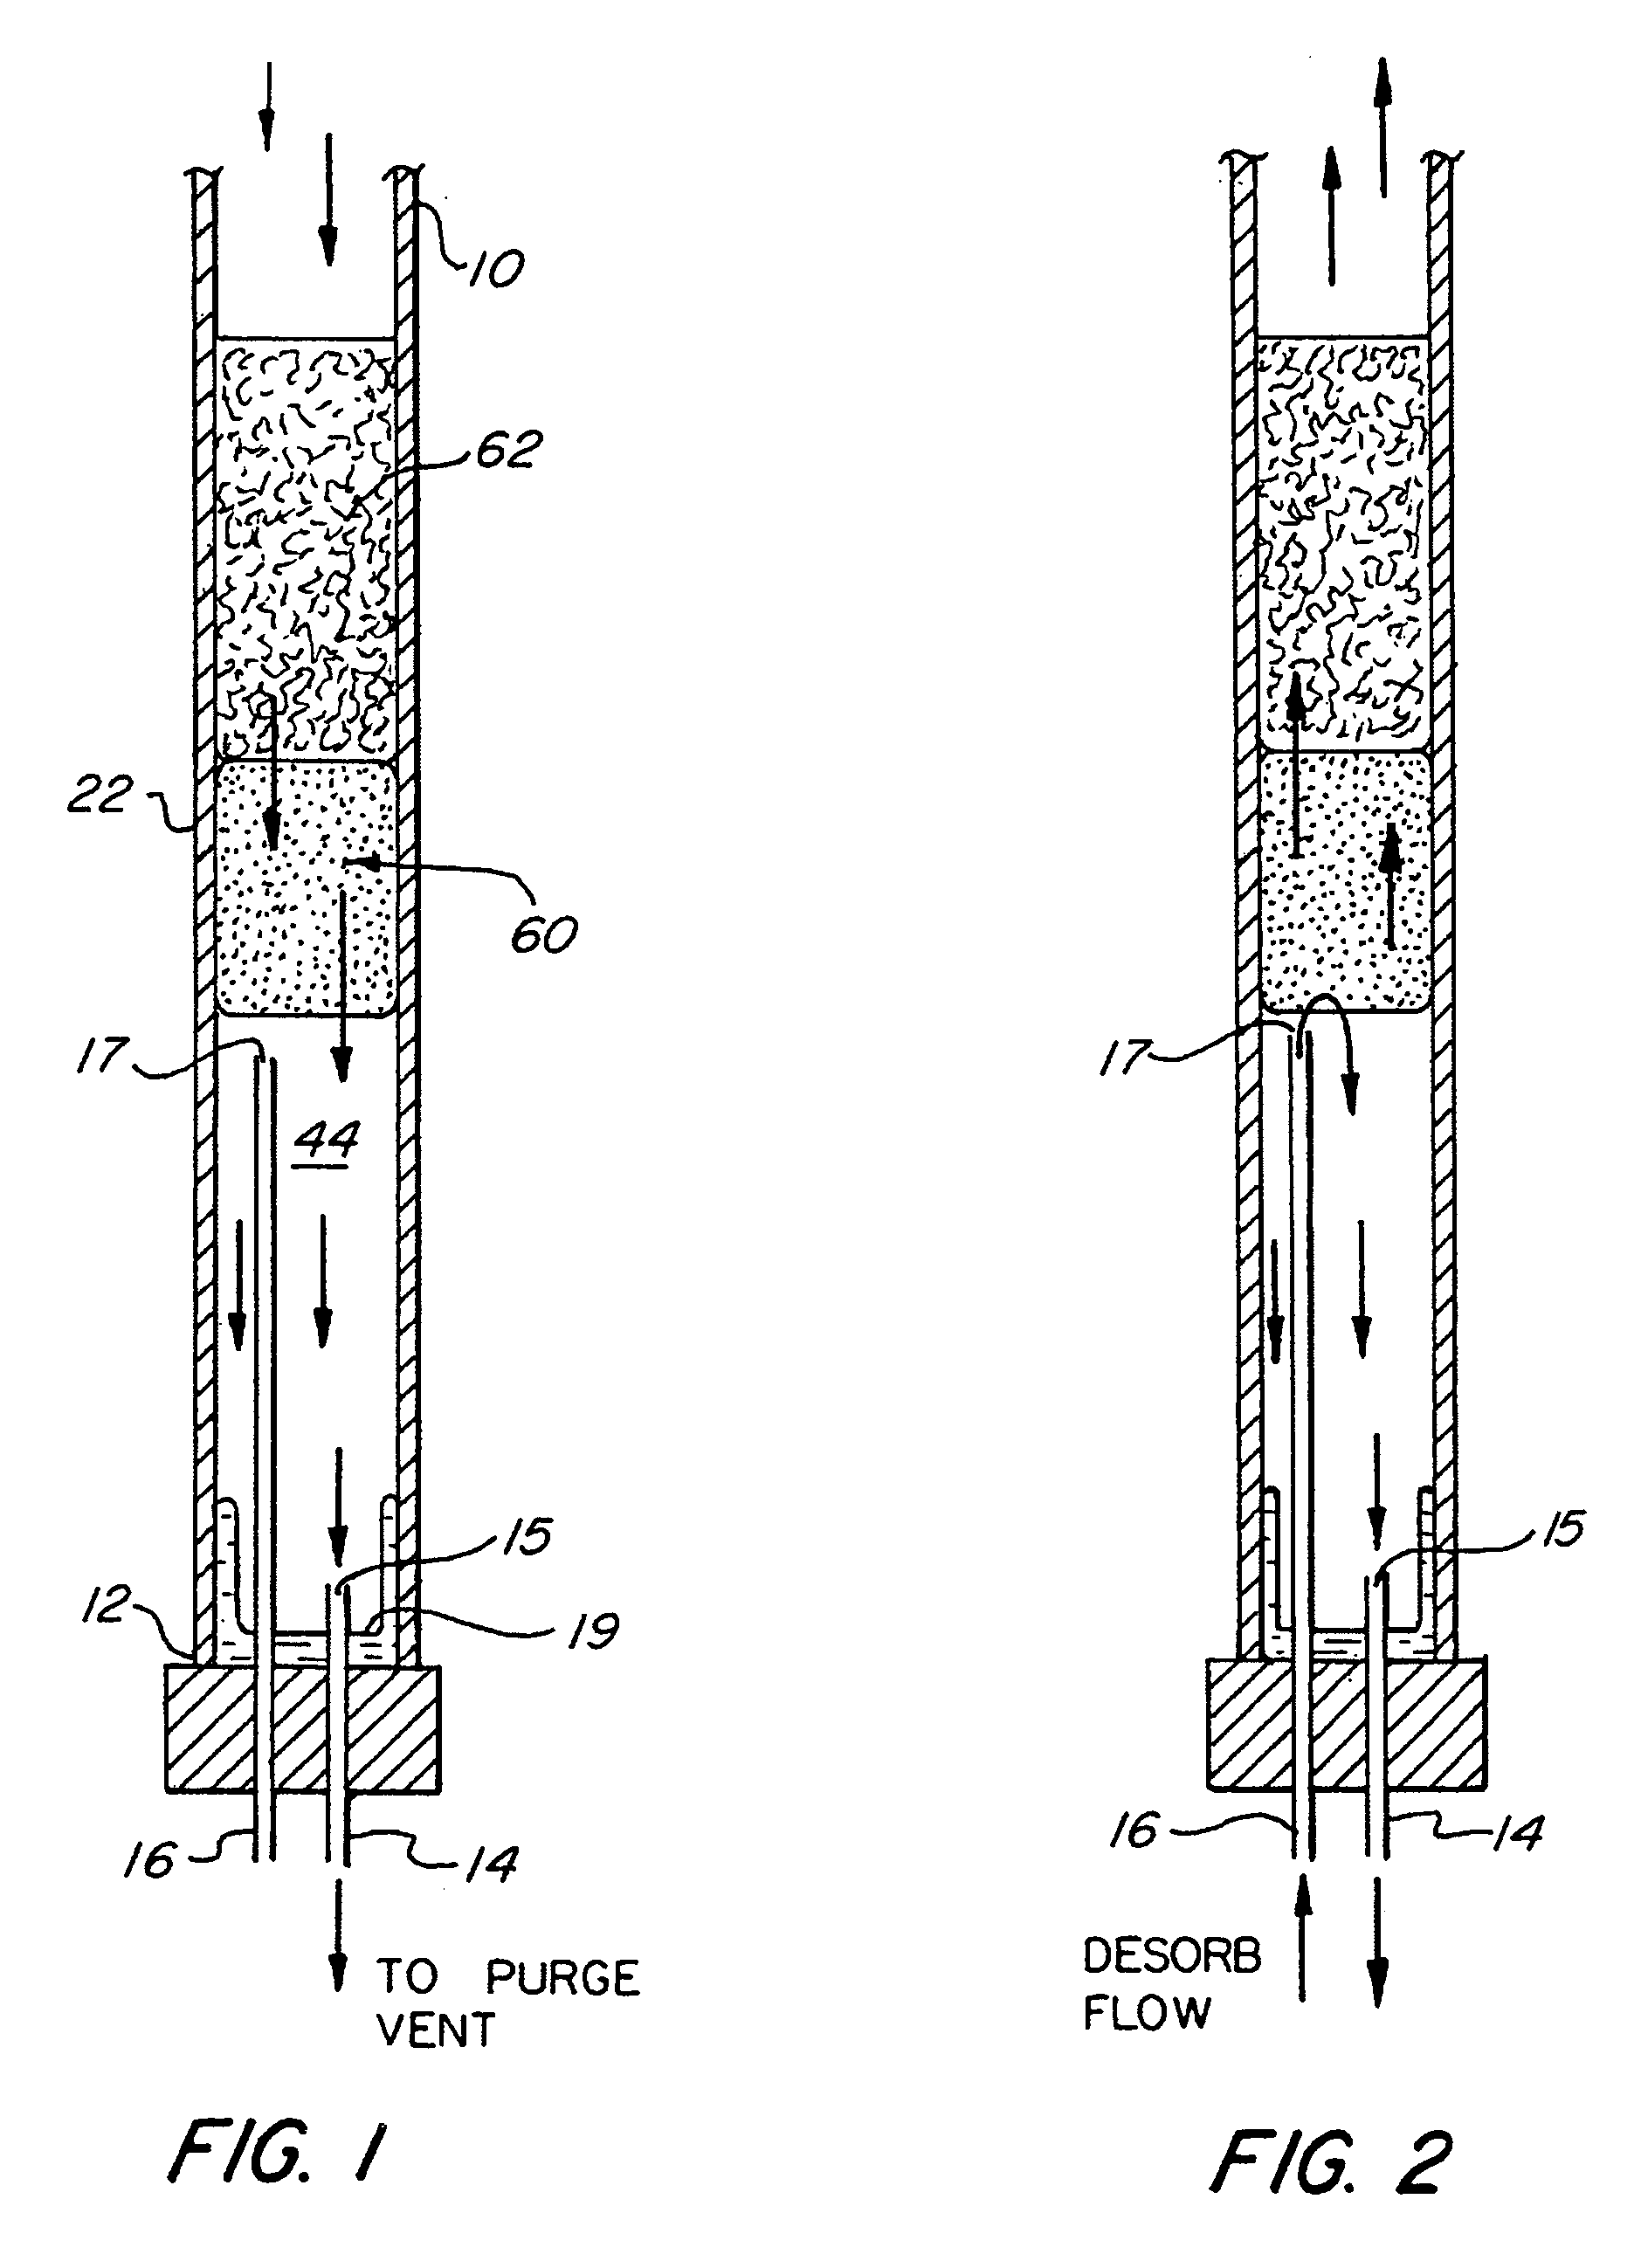 Adsorbent housing with separated adsorption outflow and desorption inflow